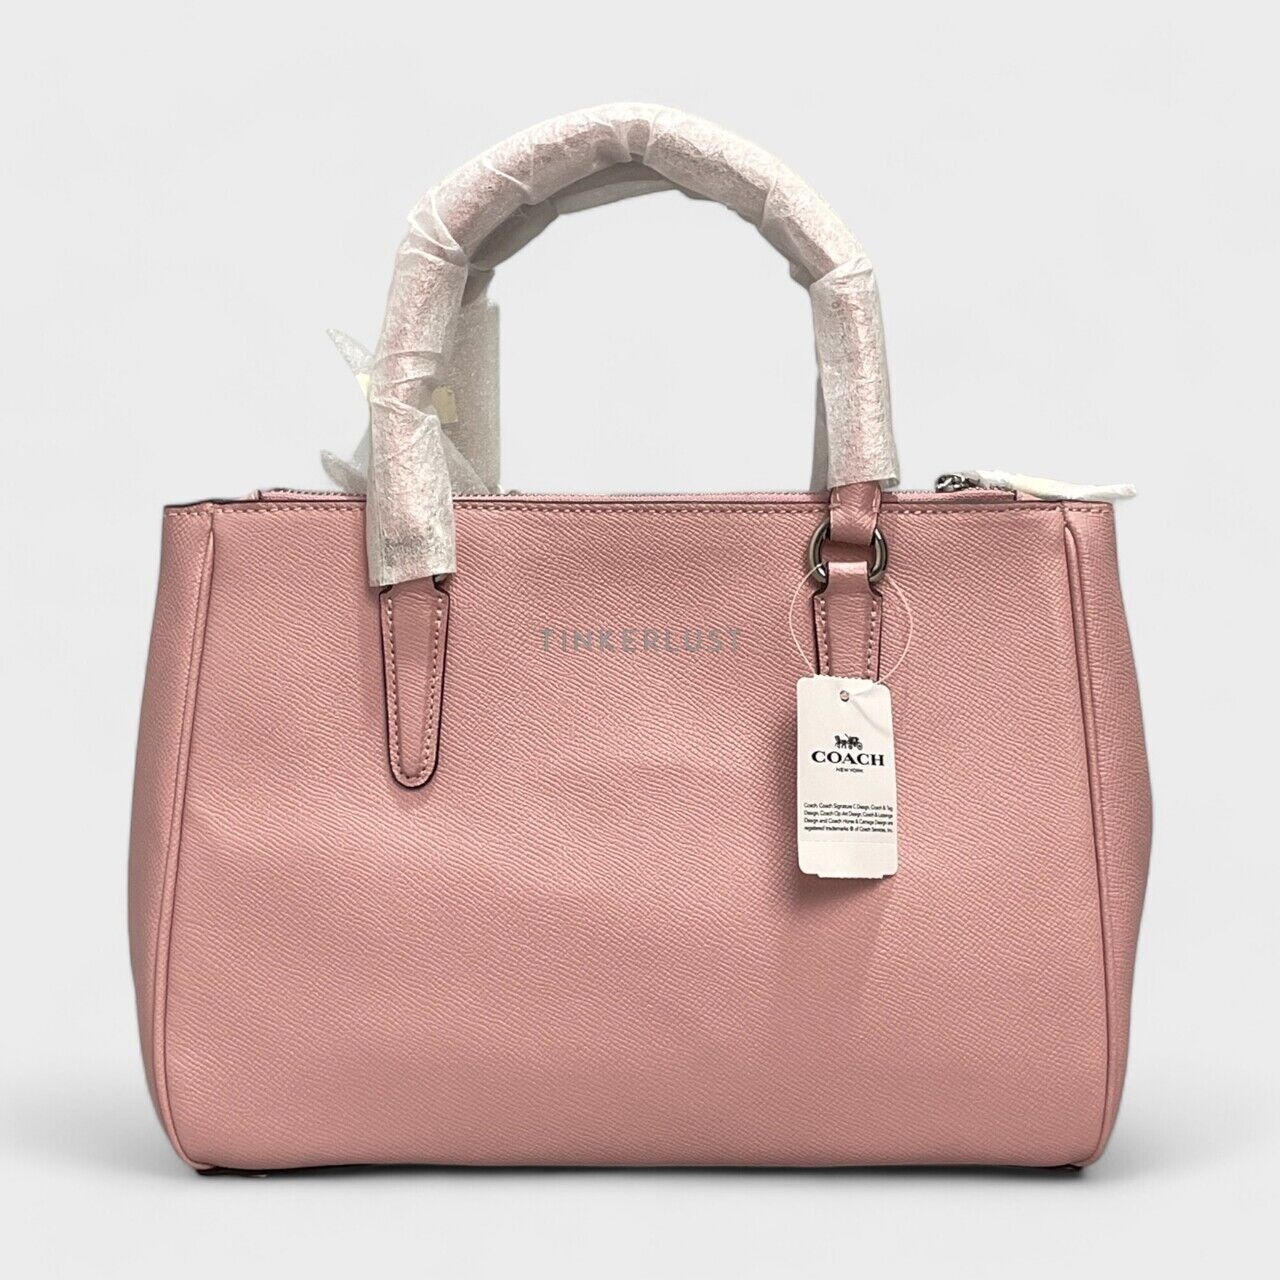 Coach Surrey Carryall Pink Leather SHW Satchel